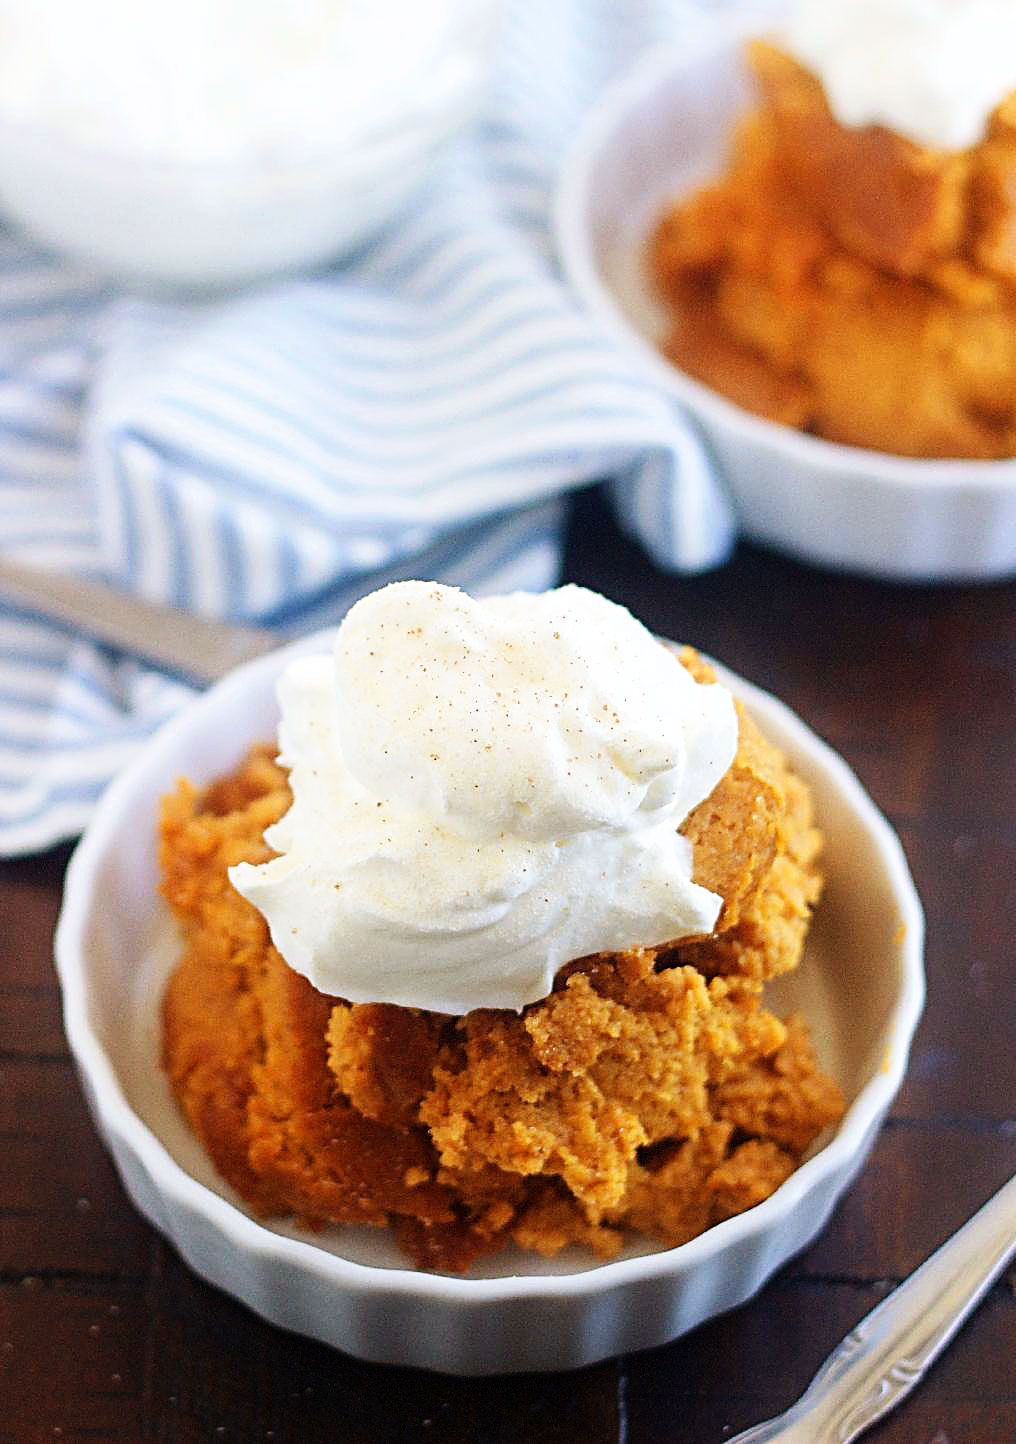 Pumpkin Pie Pudding is a sweet, creamy pudding full of pumpkin flavor all made in a slow cooker. Life-in-the-Lofthouse.com